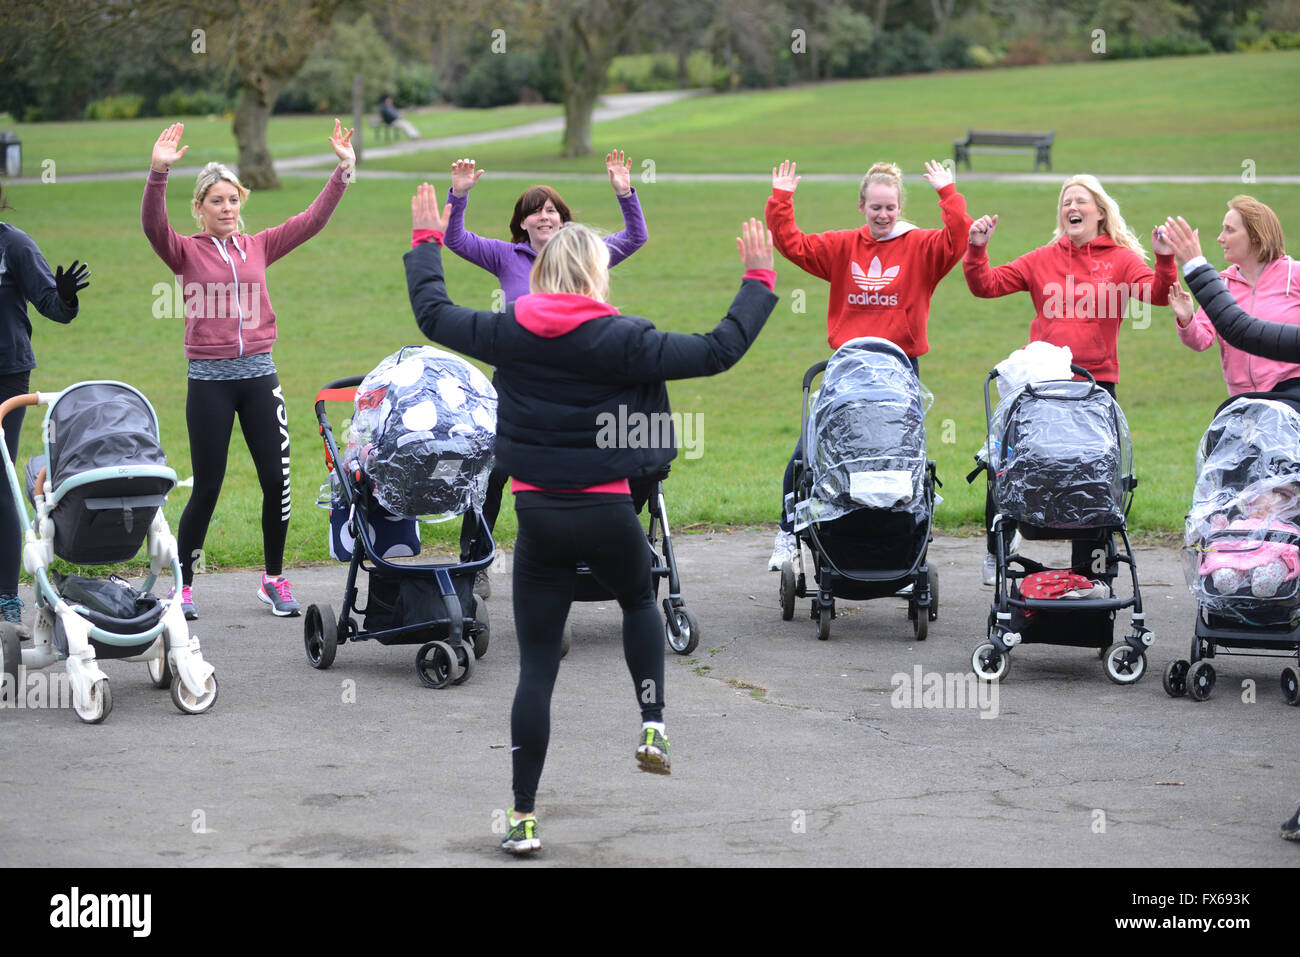 New mums exercising and keeping fit in the park. Stock Photo